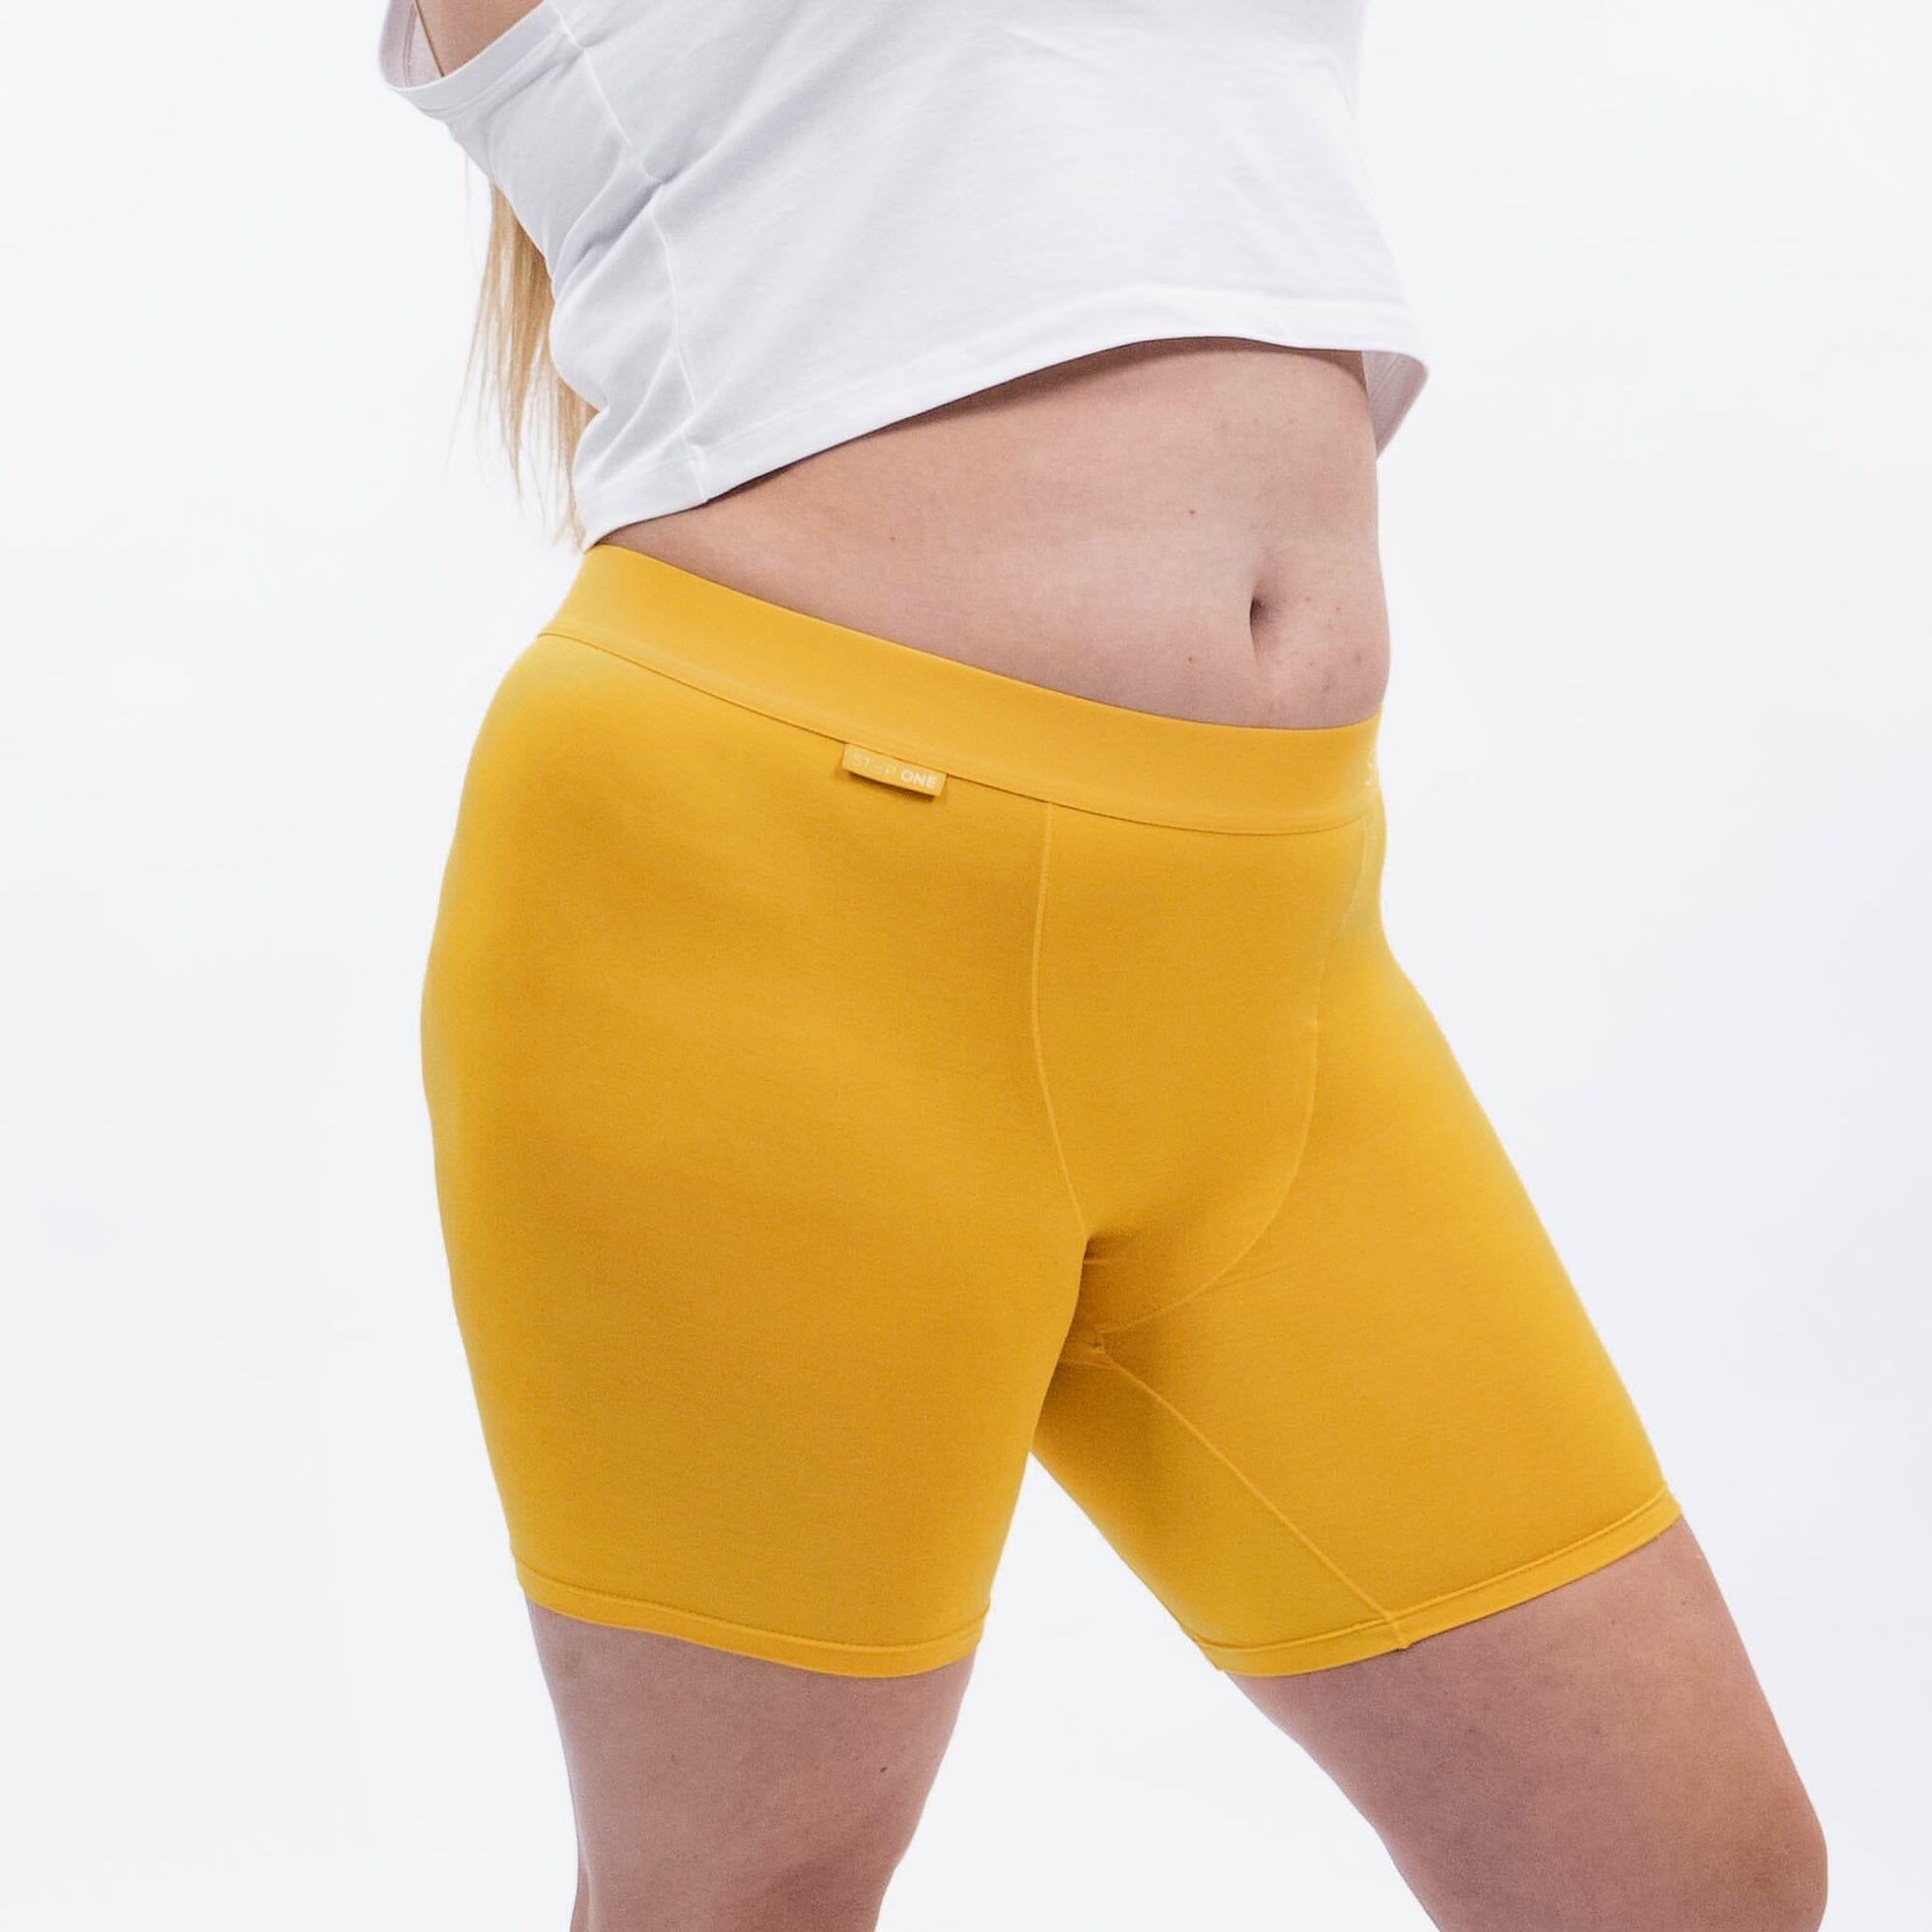 Women's Boxer Brief - Cheeky Cheddars - Model - #size_3XL